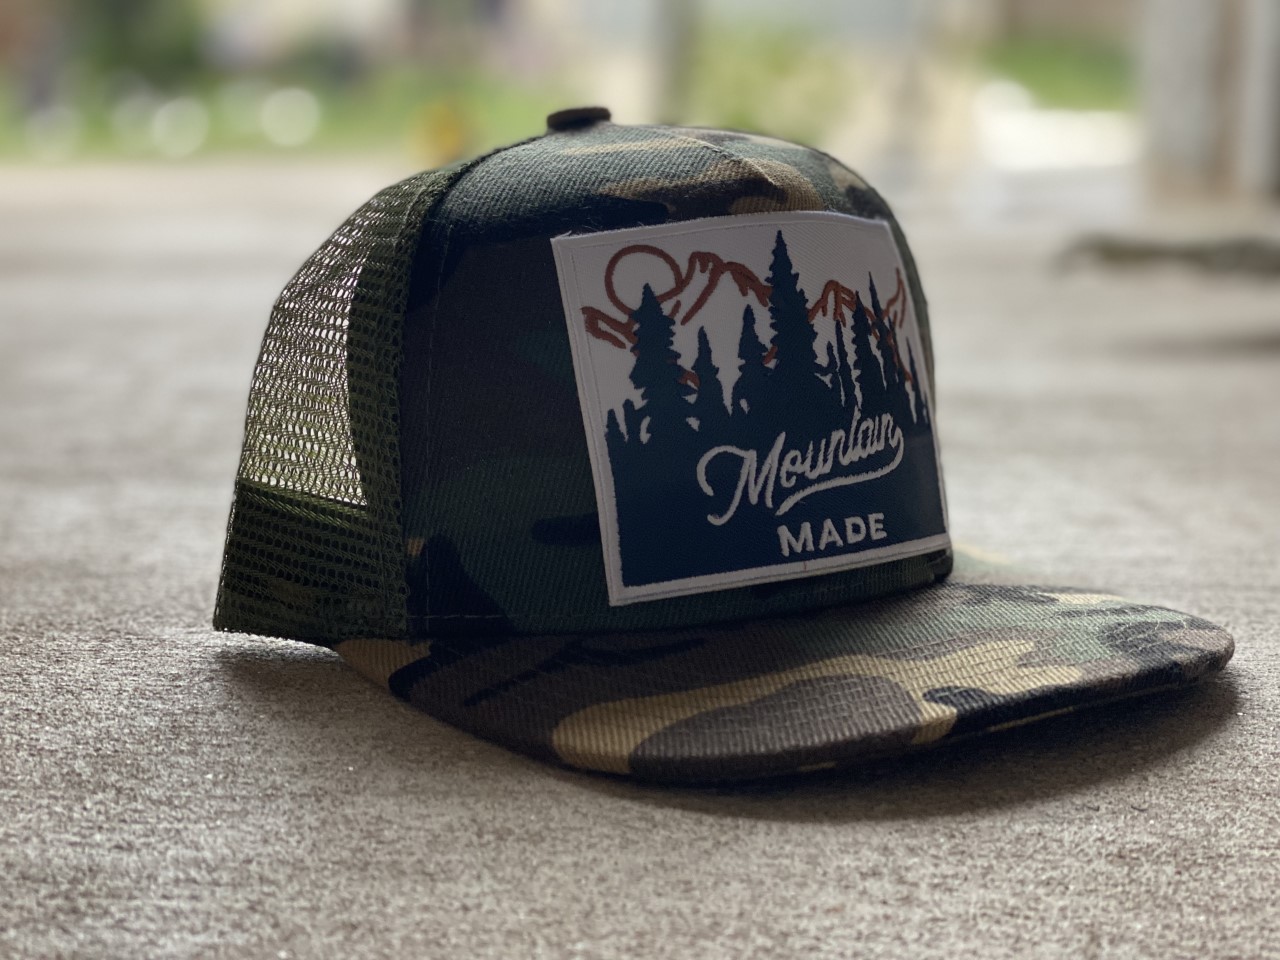 Mountain Made - Youth Trucker Hat - Little & Empowered